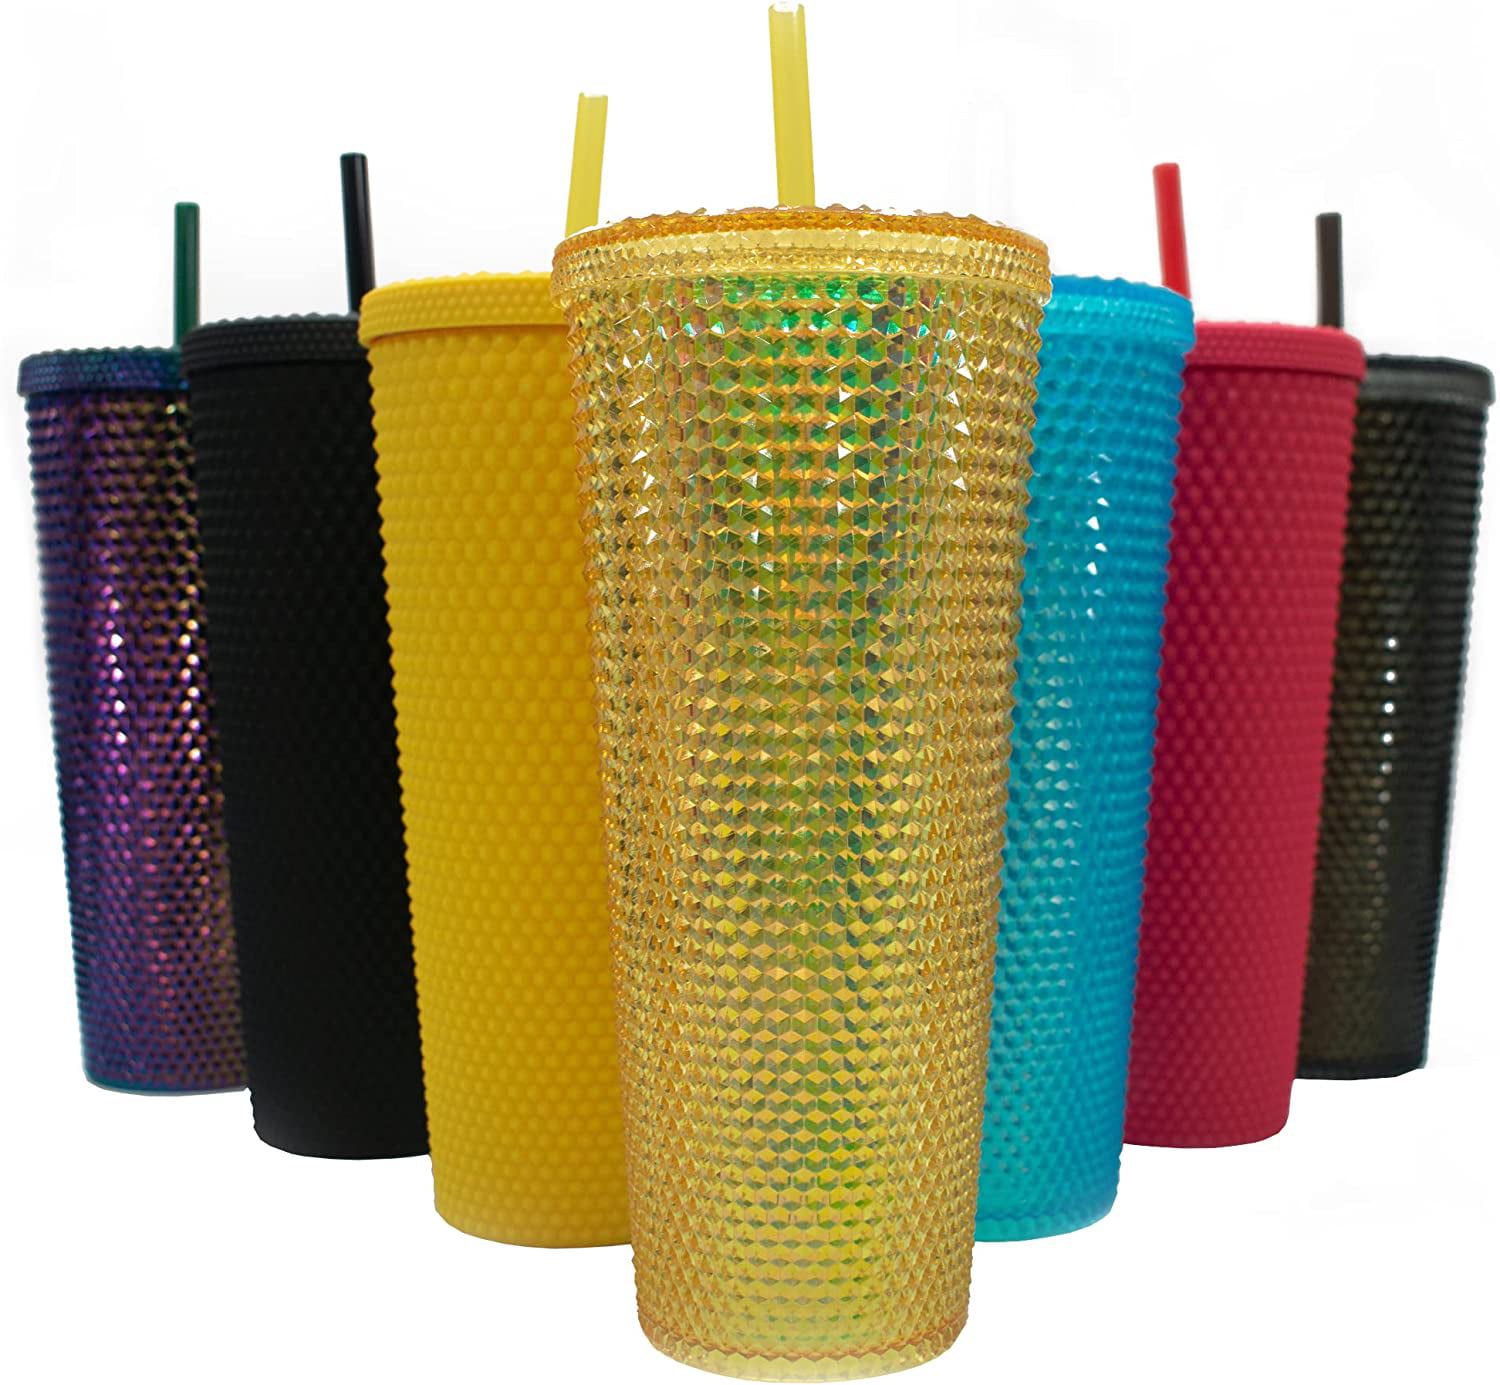 Tumbler Cooling Cup – Spoiled Store